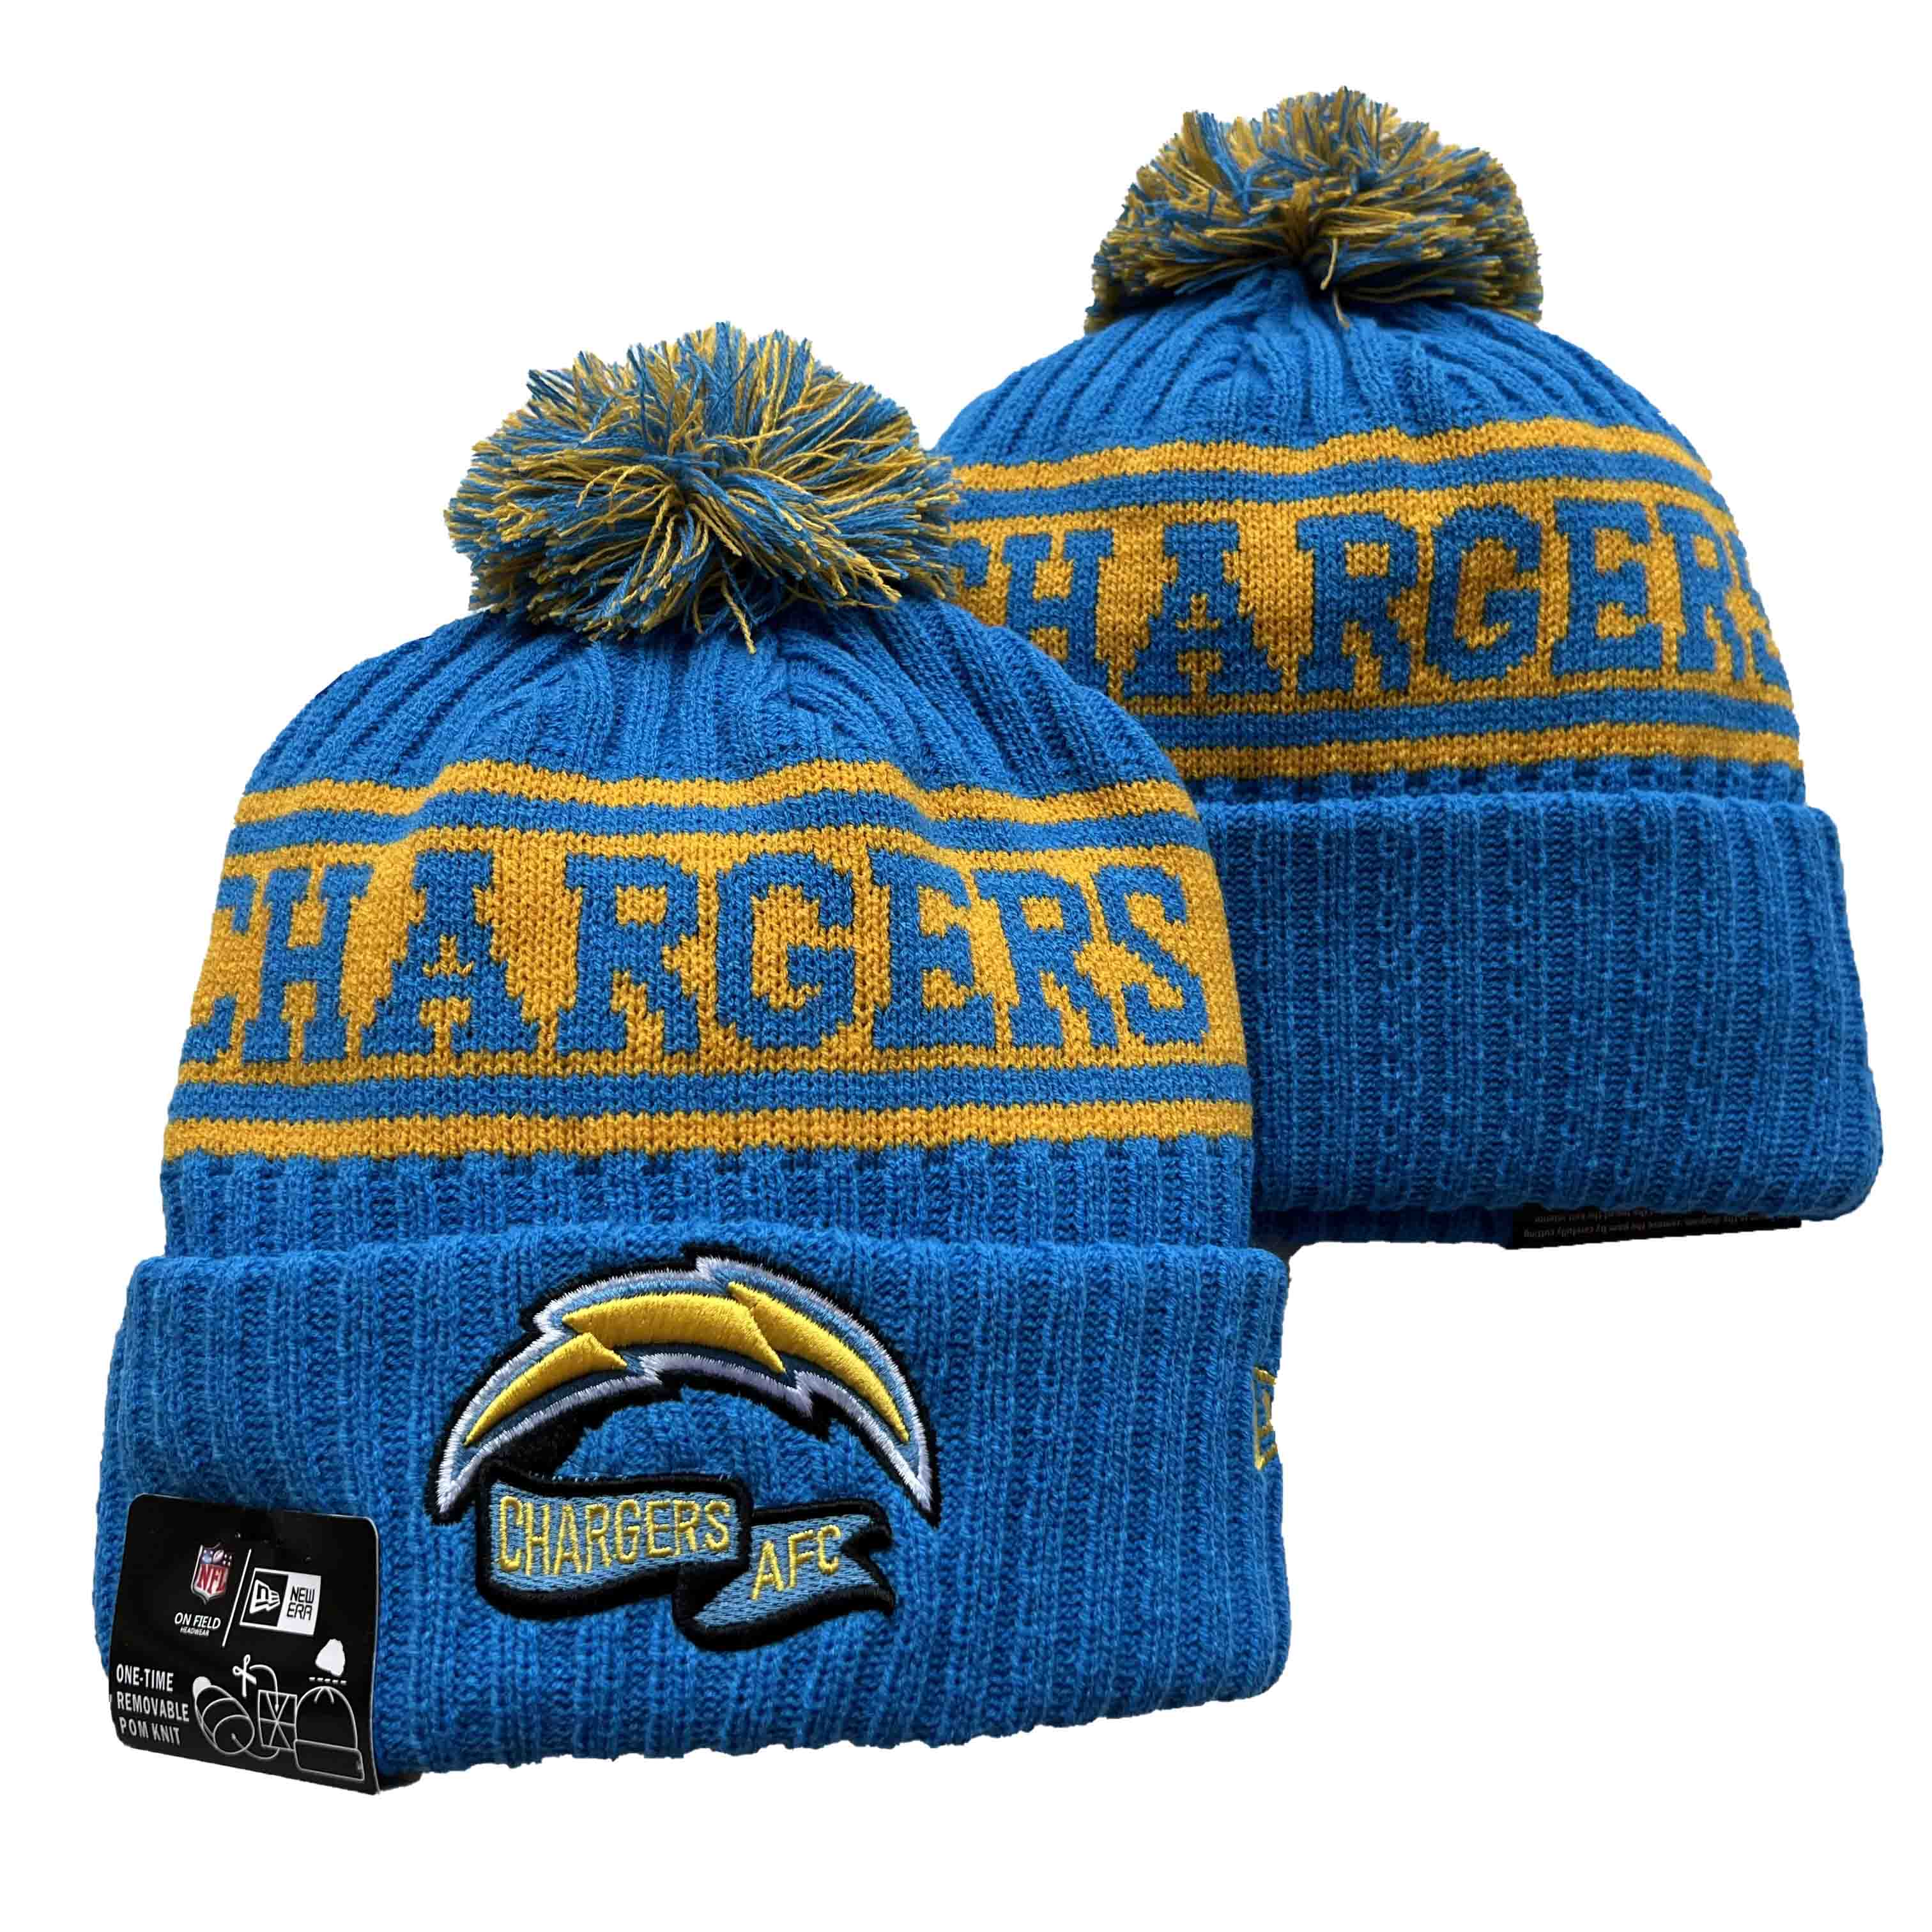 NFL San Diego Chargers Beanies Knit Hats-YD1114